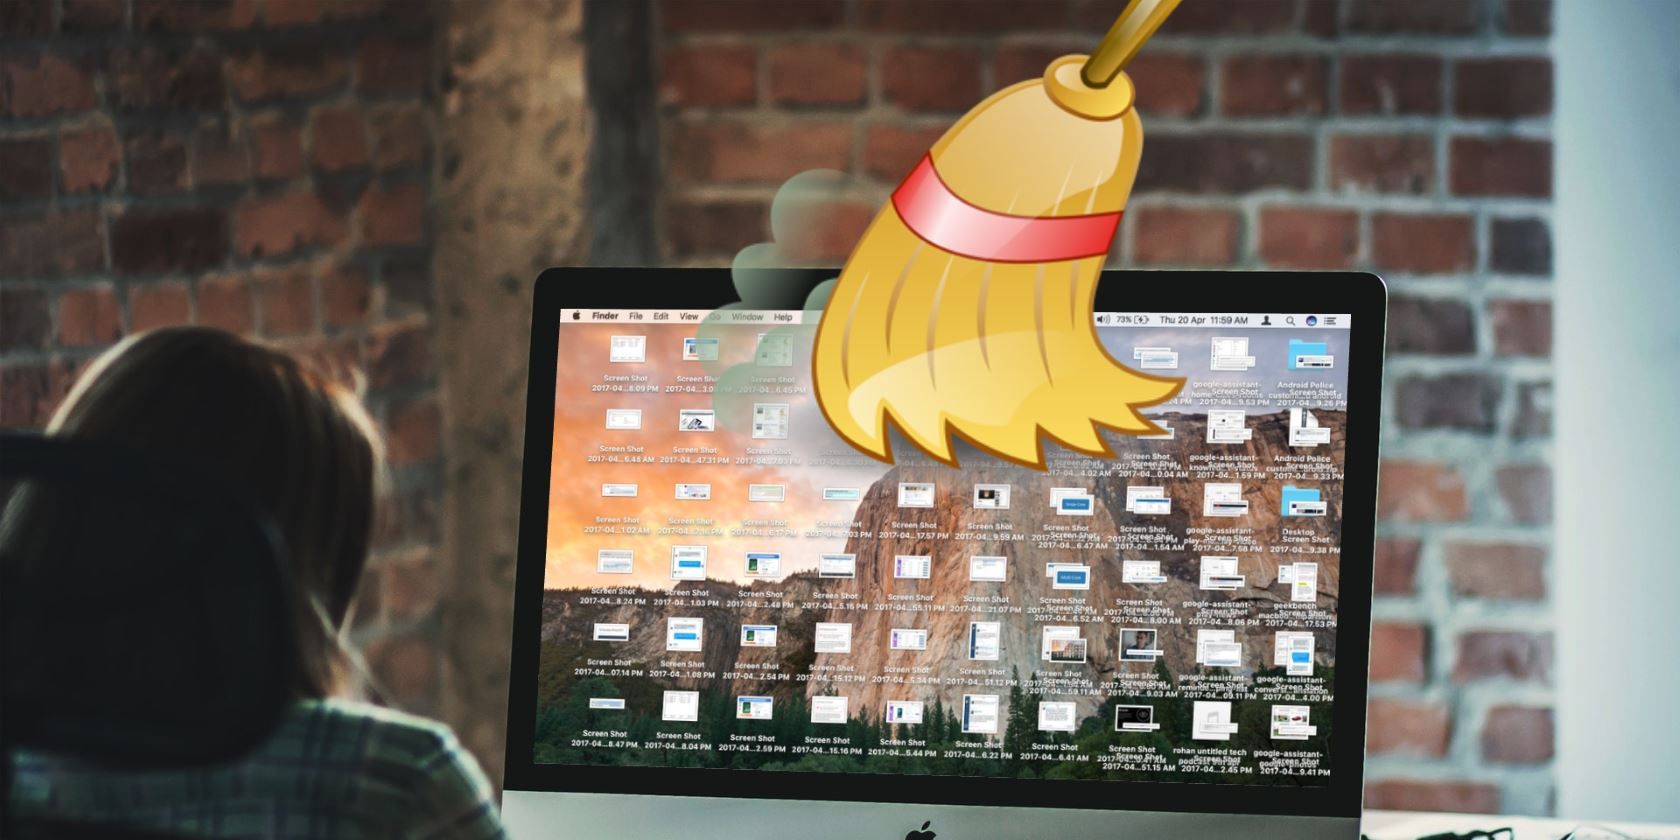 tidy up for mac review